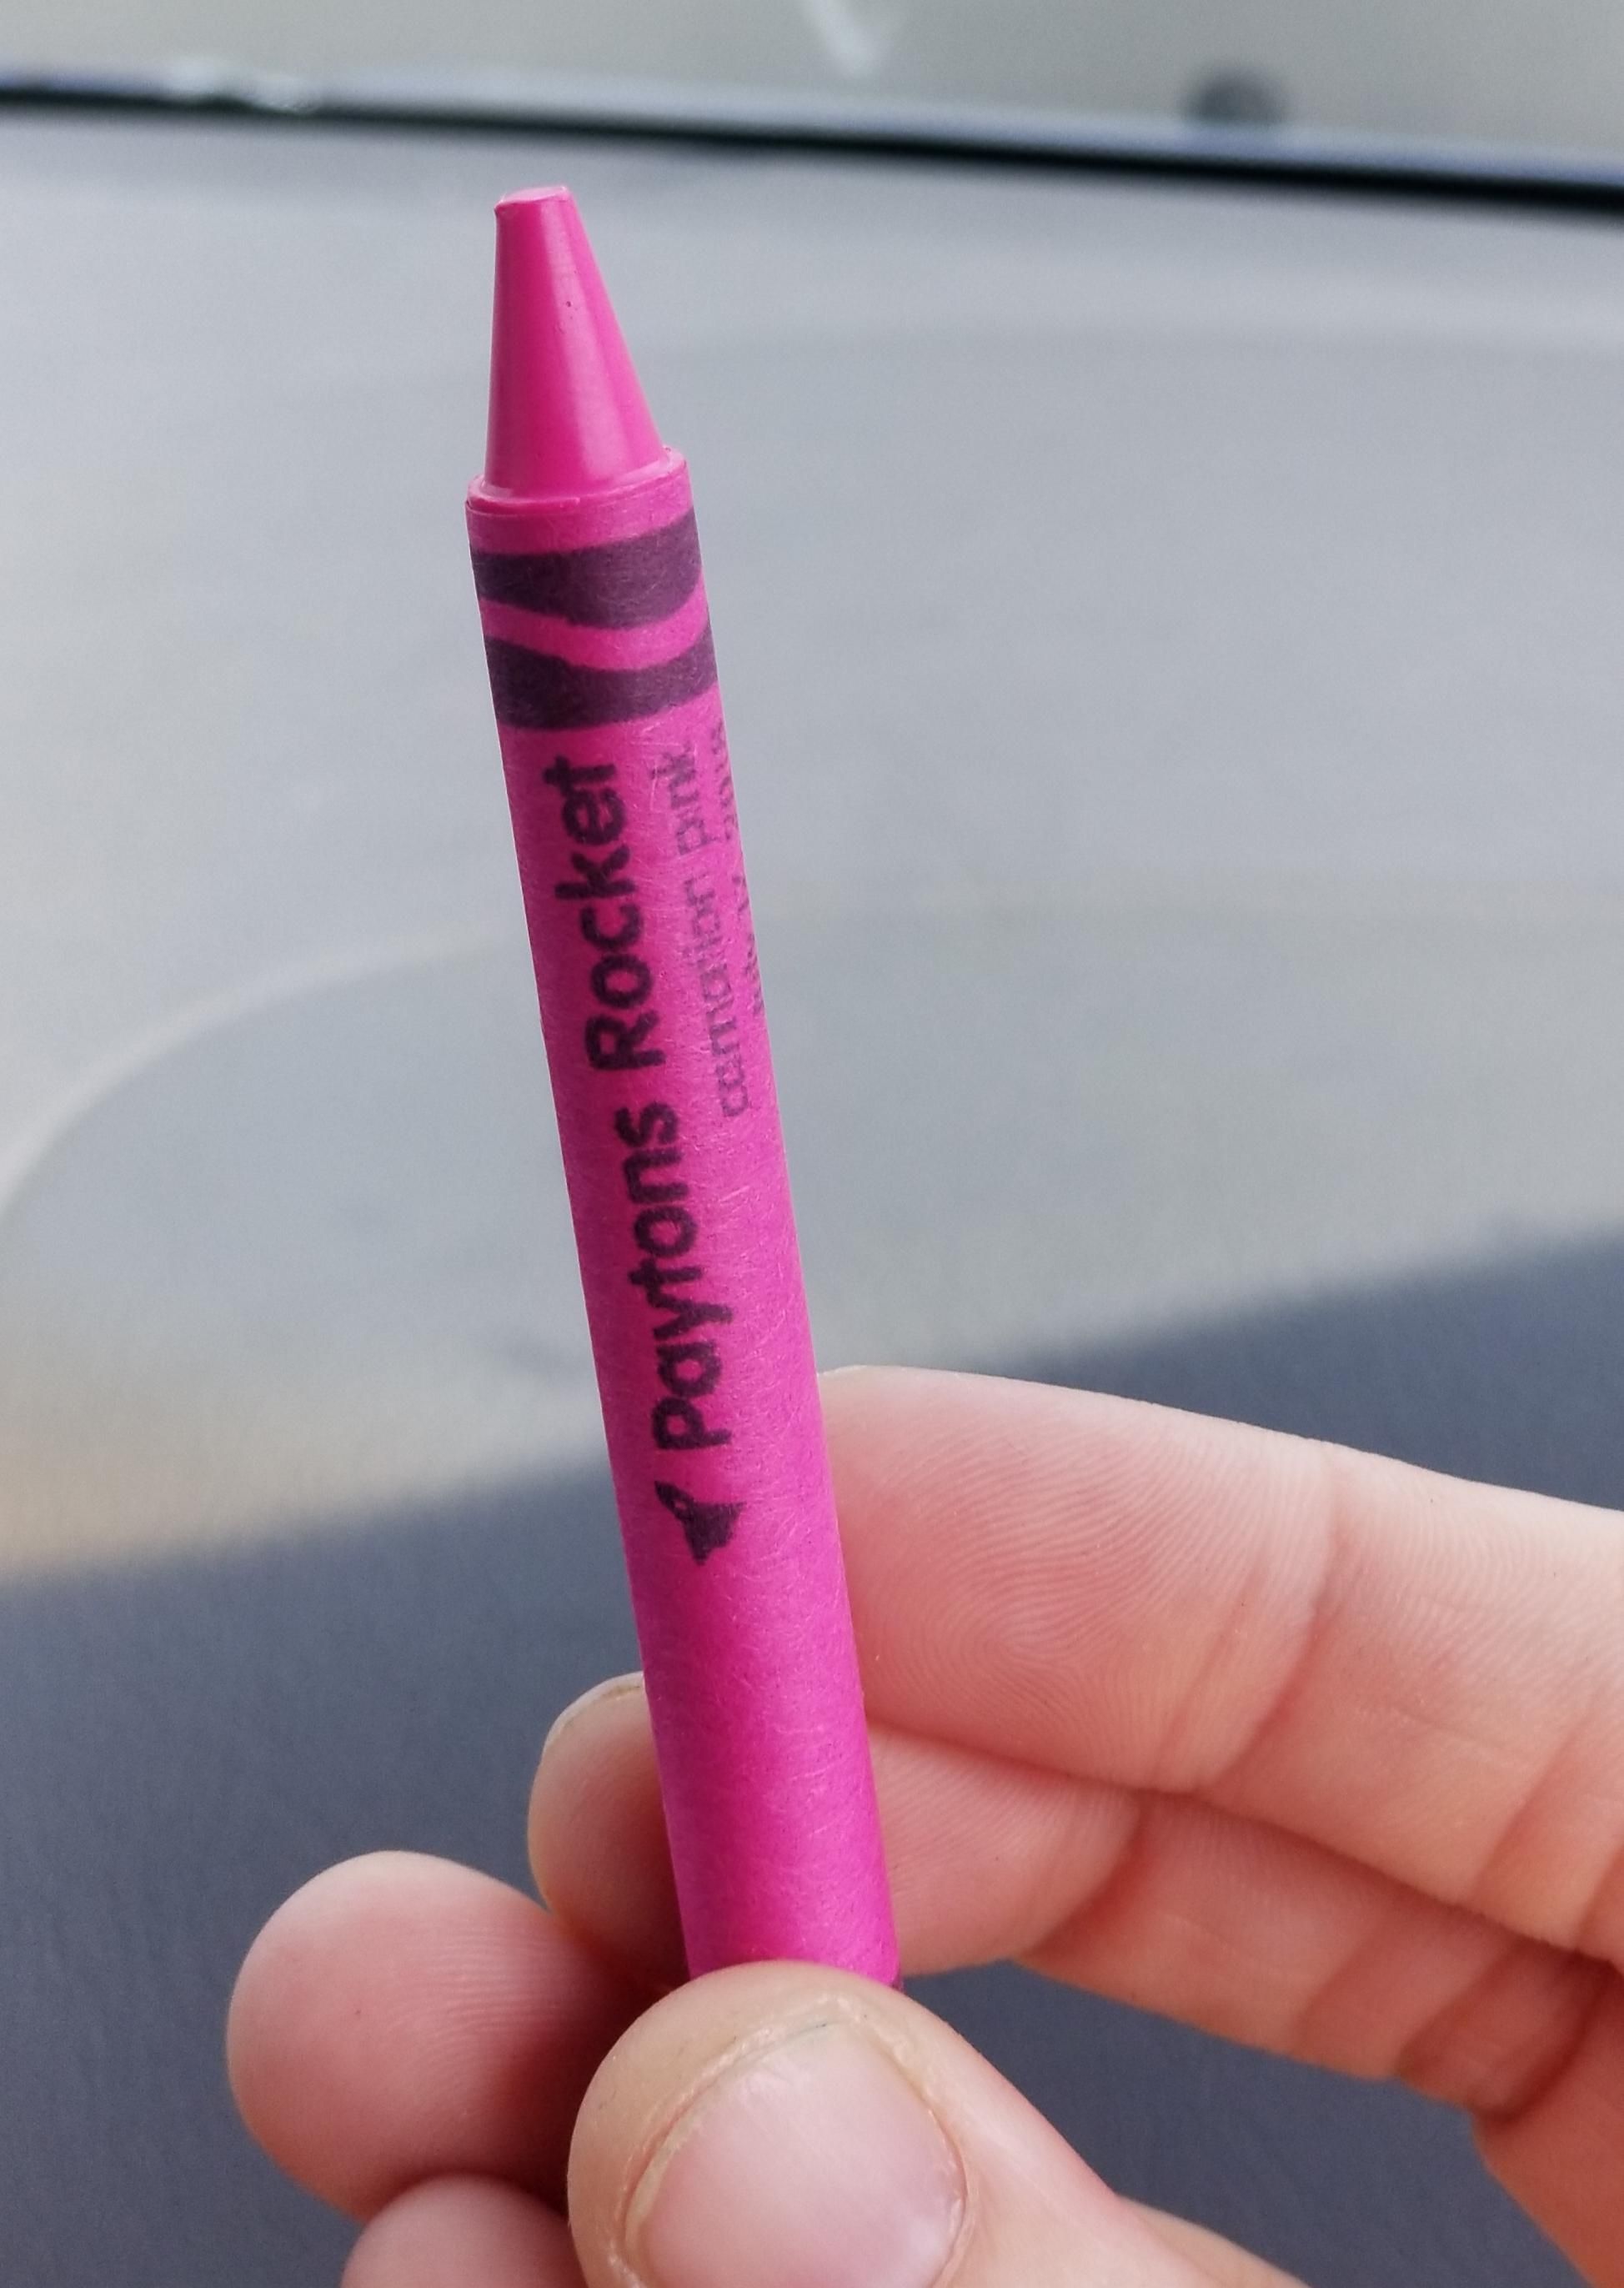 My husband is real mature. Couldn't leave the Crayola Experience without naming his own color. Payton is my moms dog that will hump literally anything.